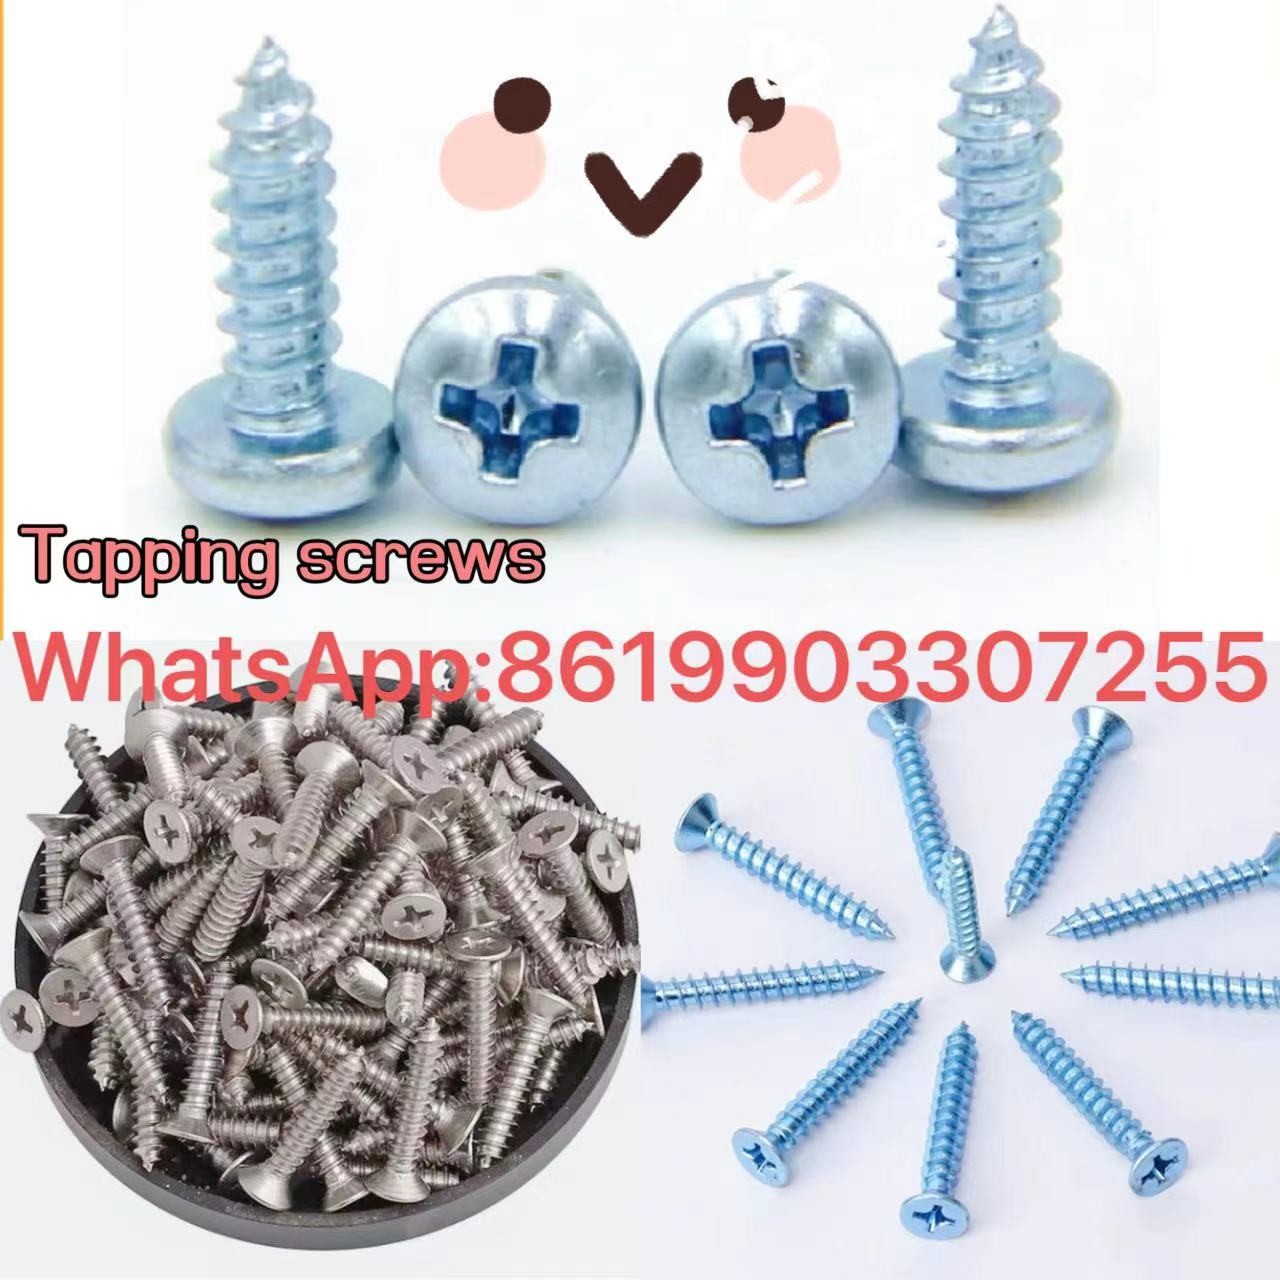 manufacturer’s tapping screws WhatsApp:8619903307255